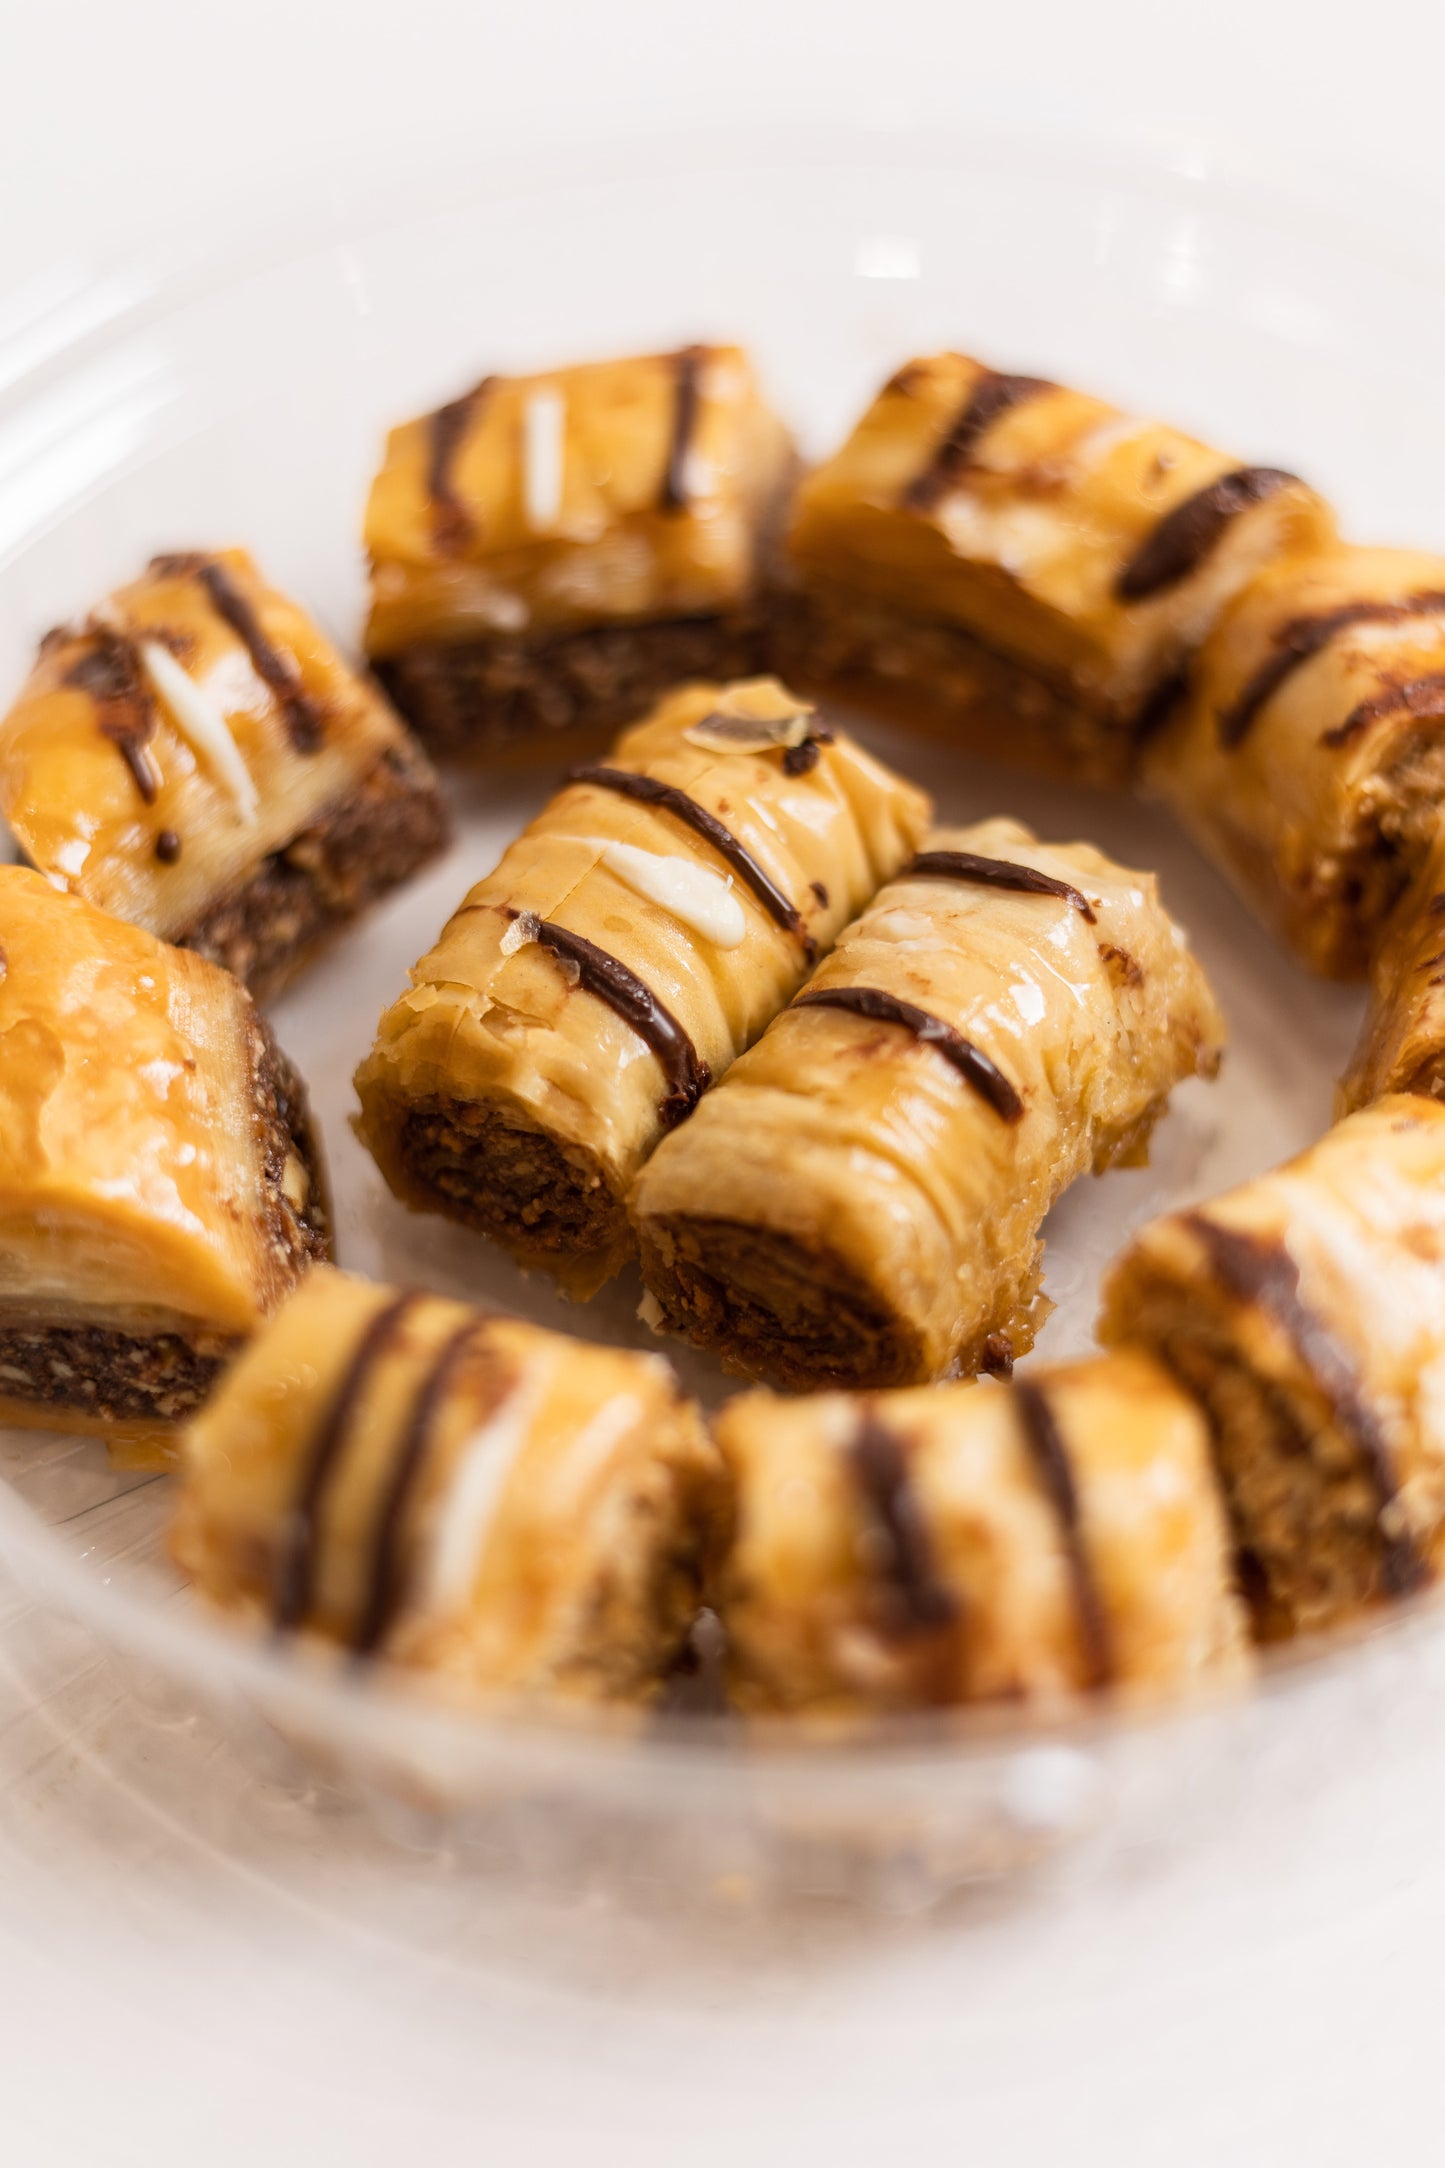 Baklawa with stuffed and drizzled chocolate